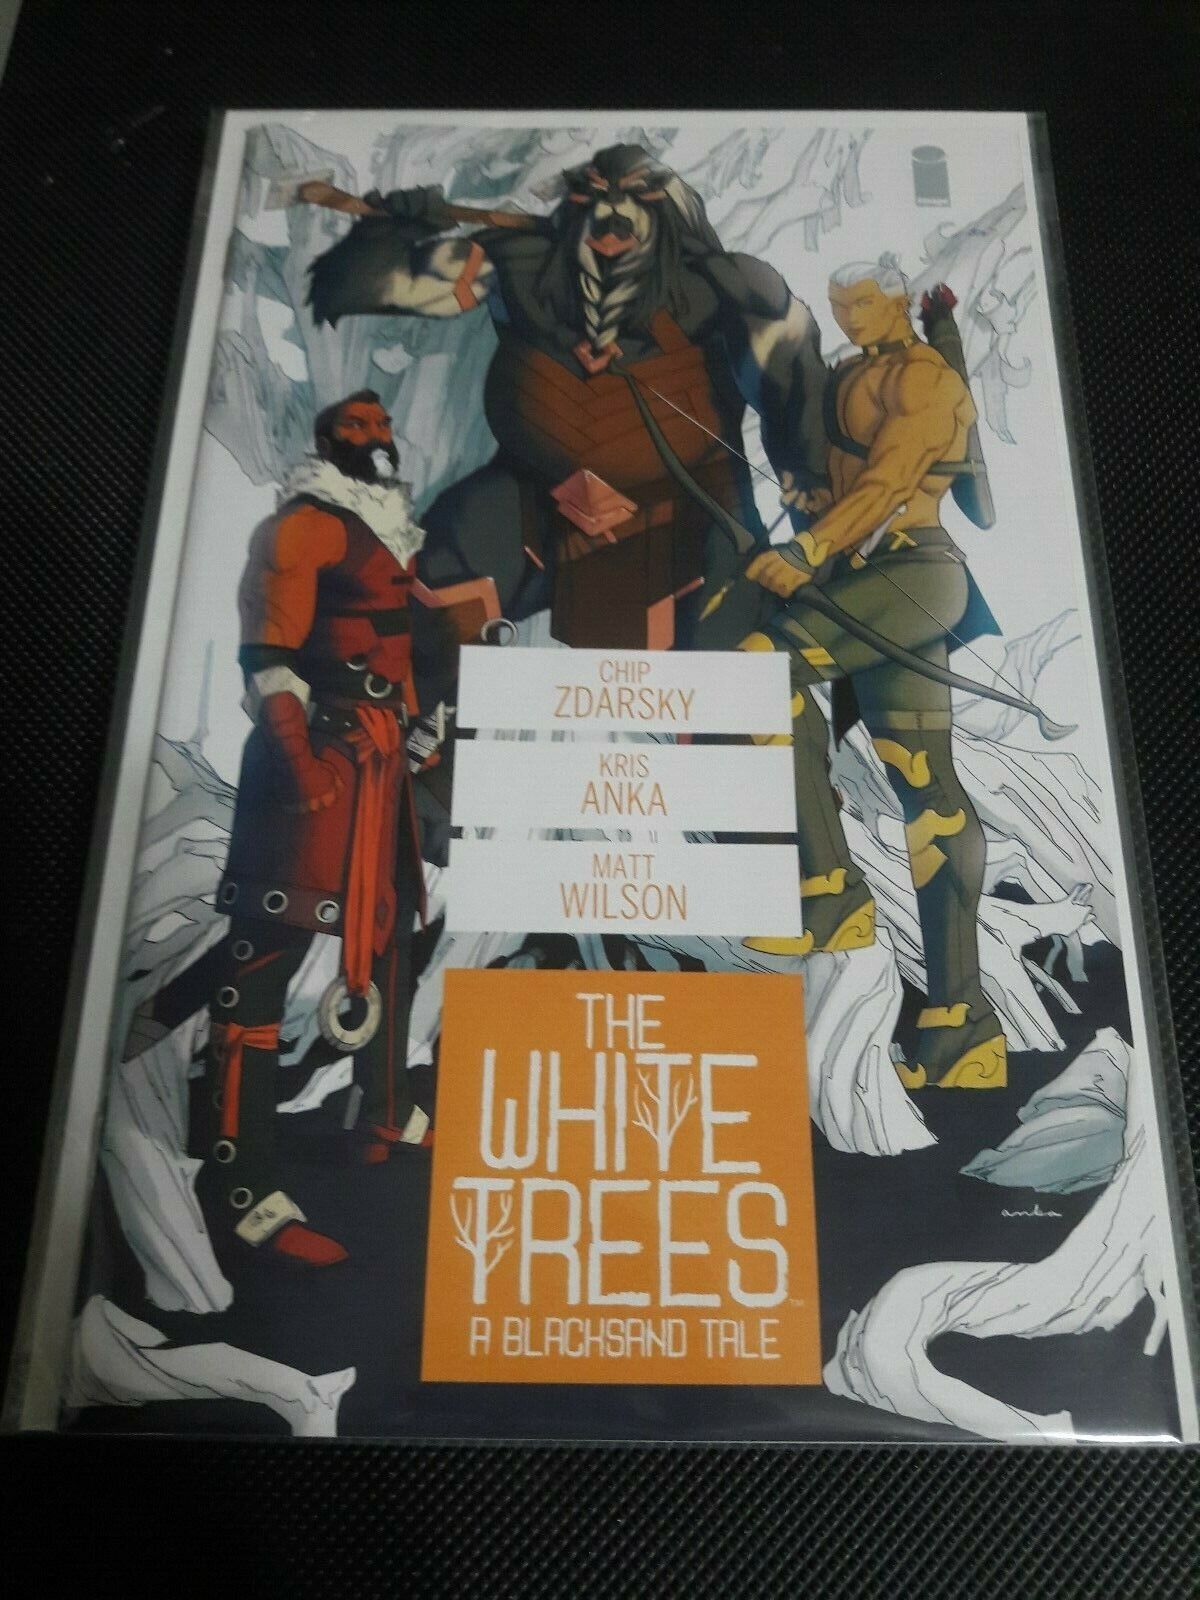 The White Trees #1 (Image) Chip Zdarsky, Hot Title, NM, 